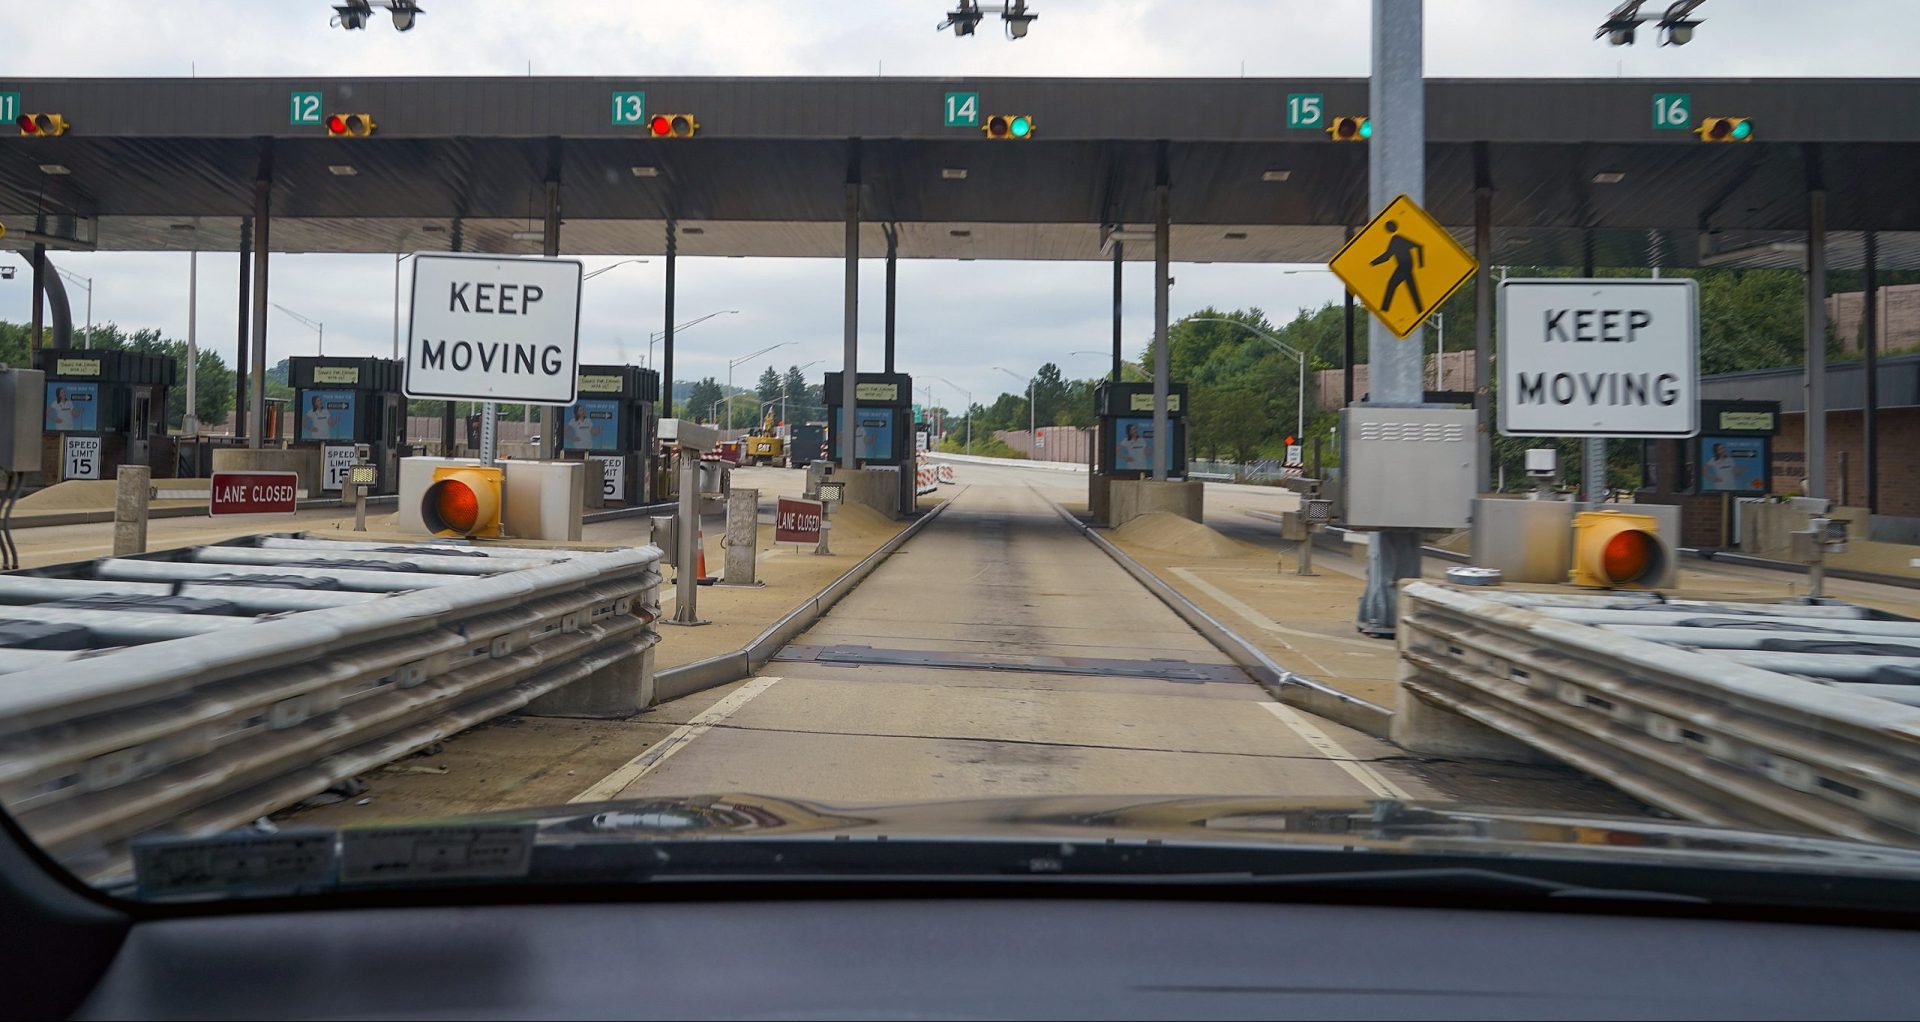 In this photo made through a windshield, the sensors and lights are seen at the west bound toll gate of the Pennsylvania Turnpike in Cranberry Township, Pa., on Monday, Aug. 30, 2021.